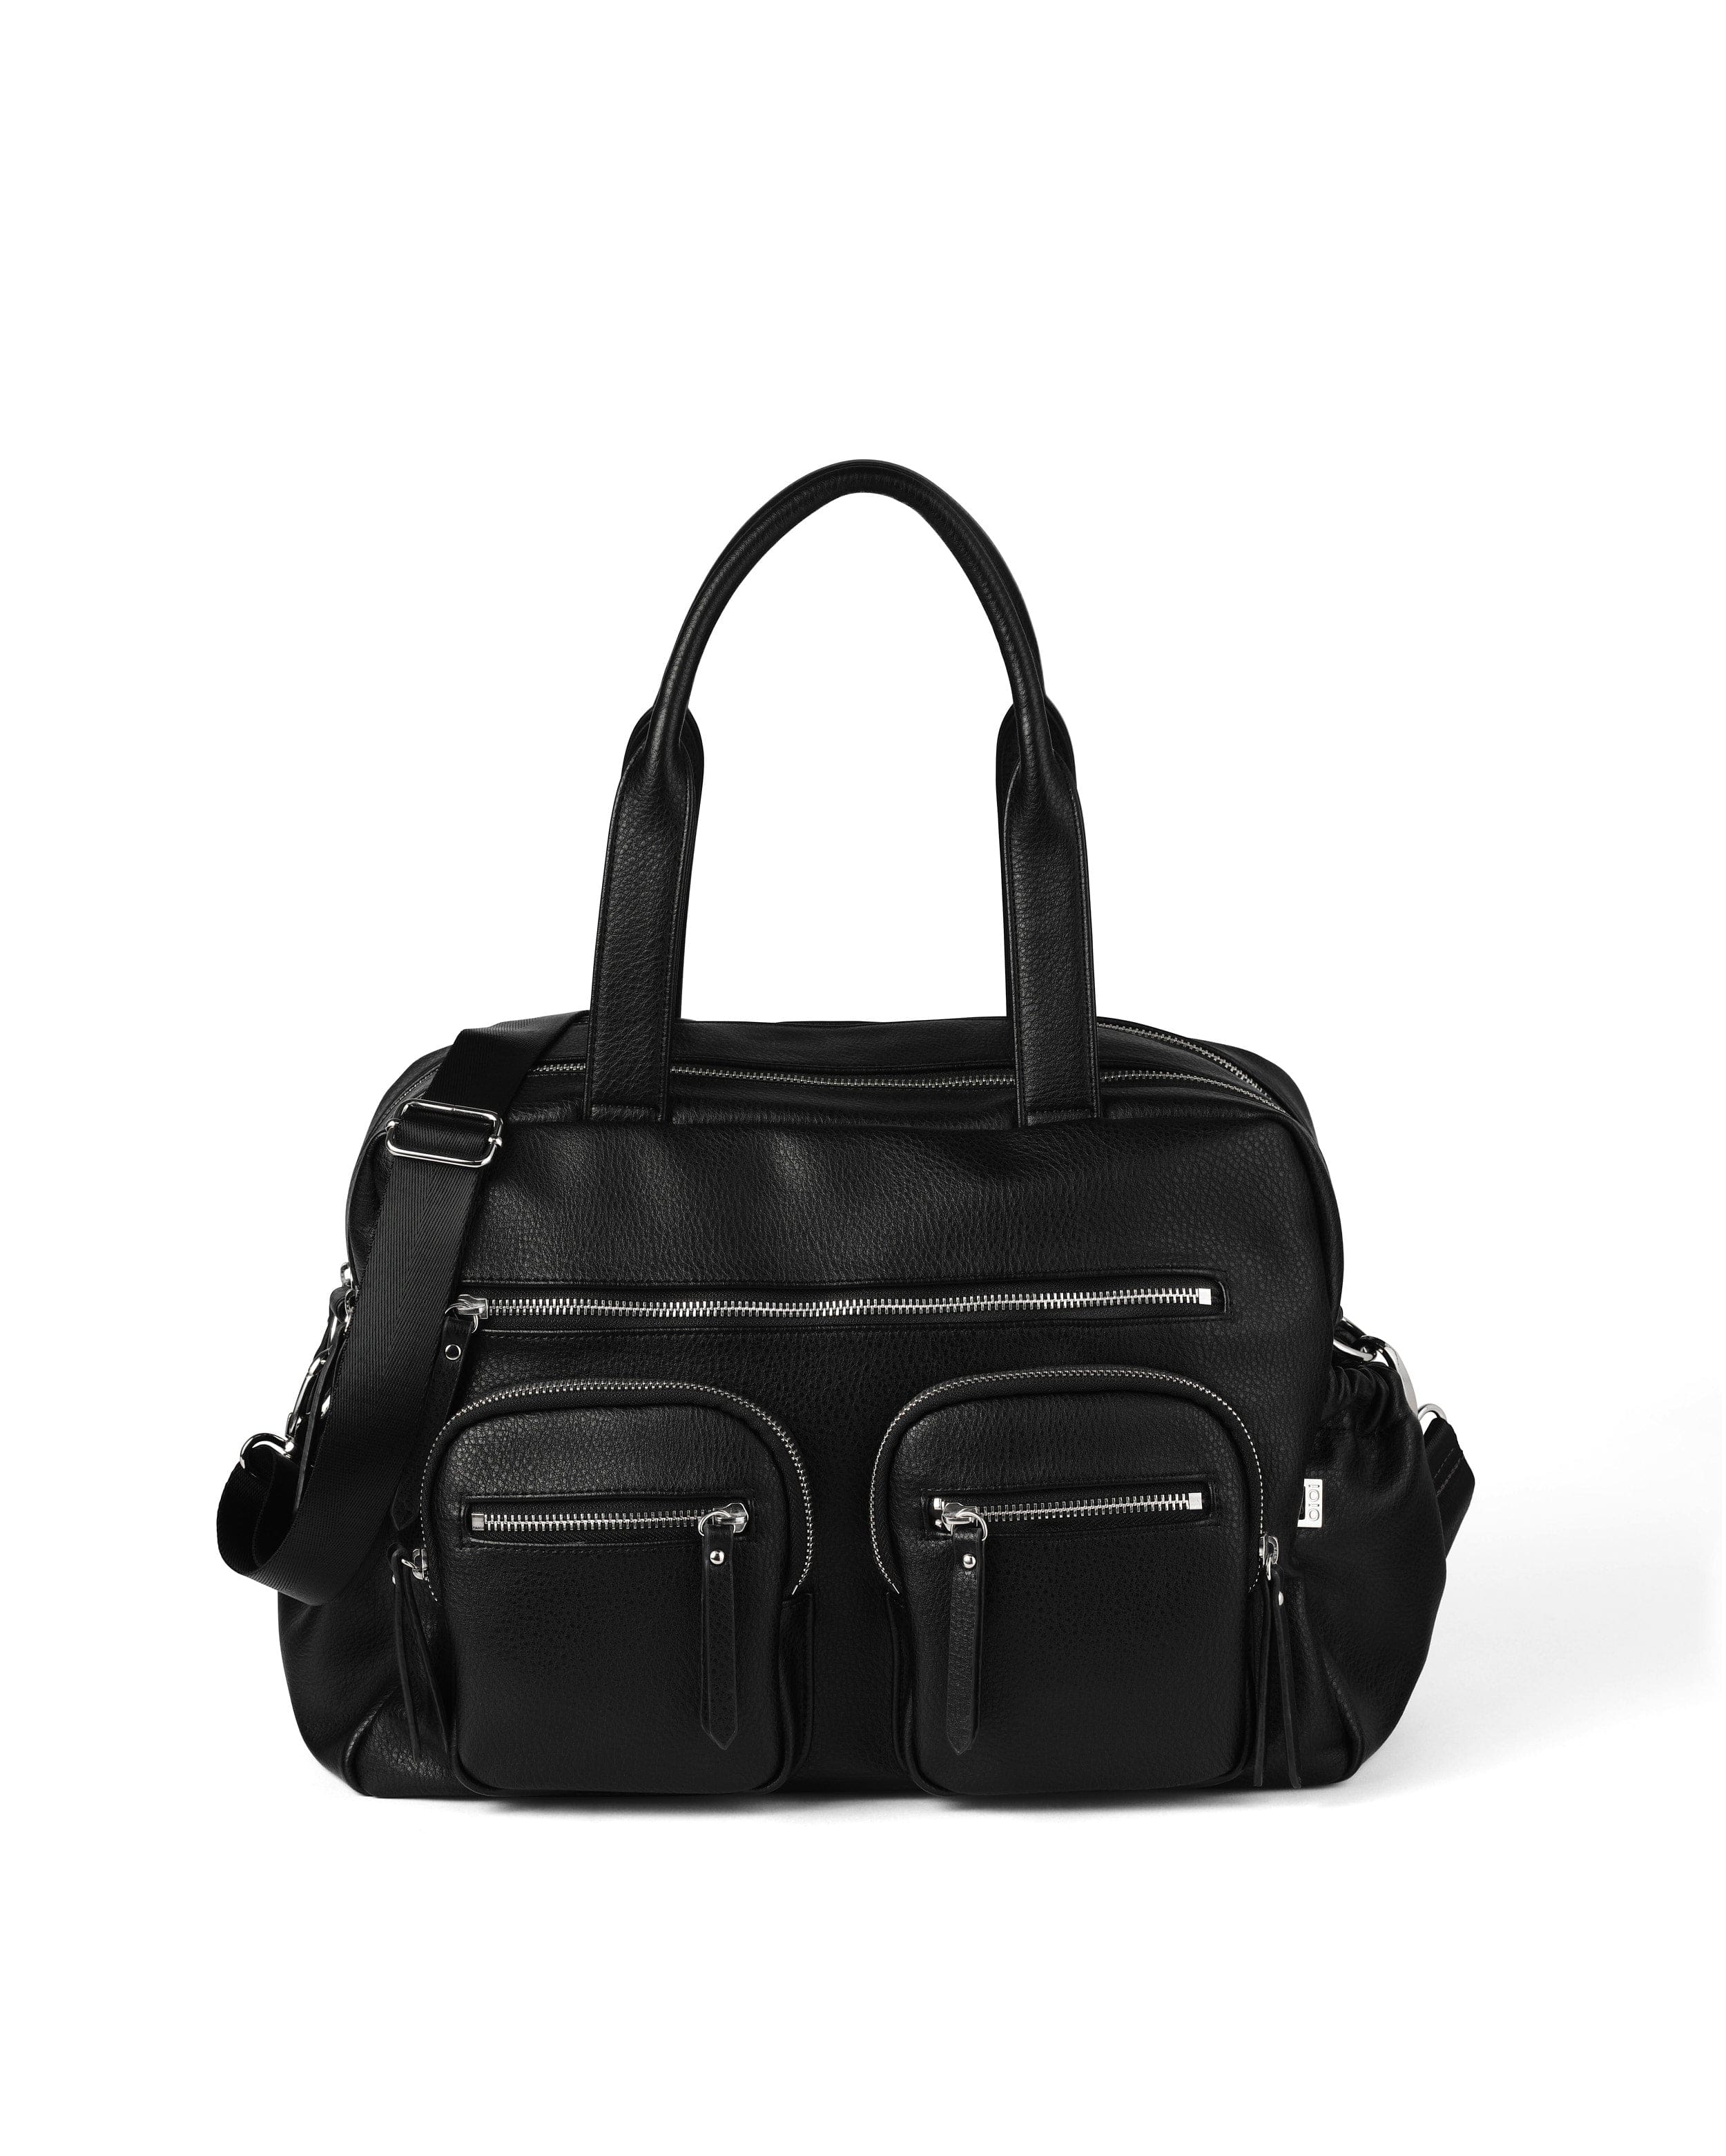 OiOi Baby Care Carry All Nappy Bag - Black Dimple Vegan Leather